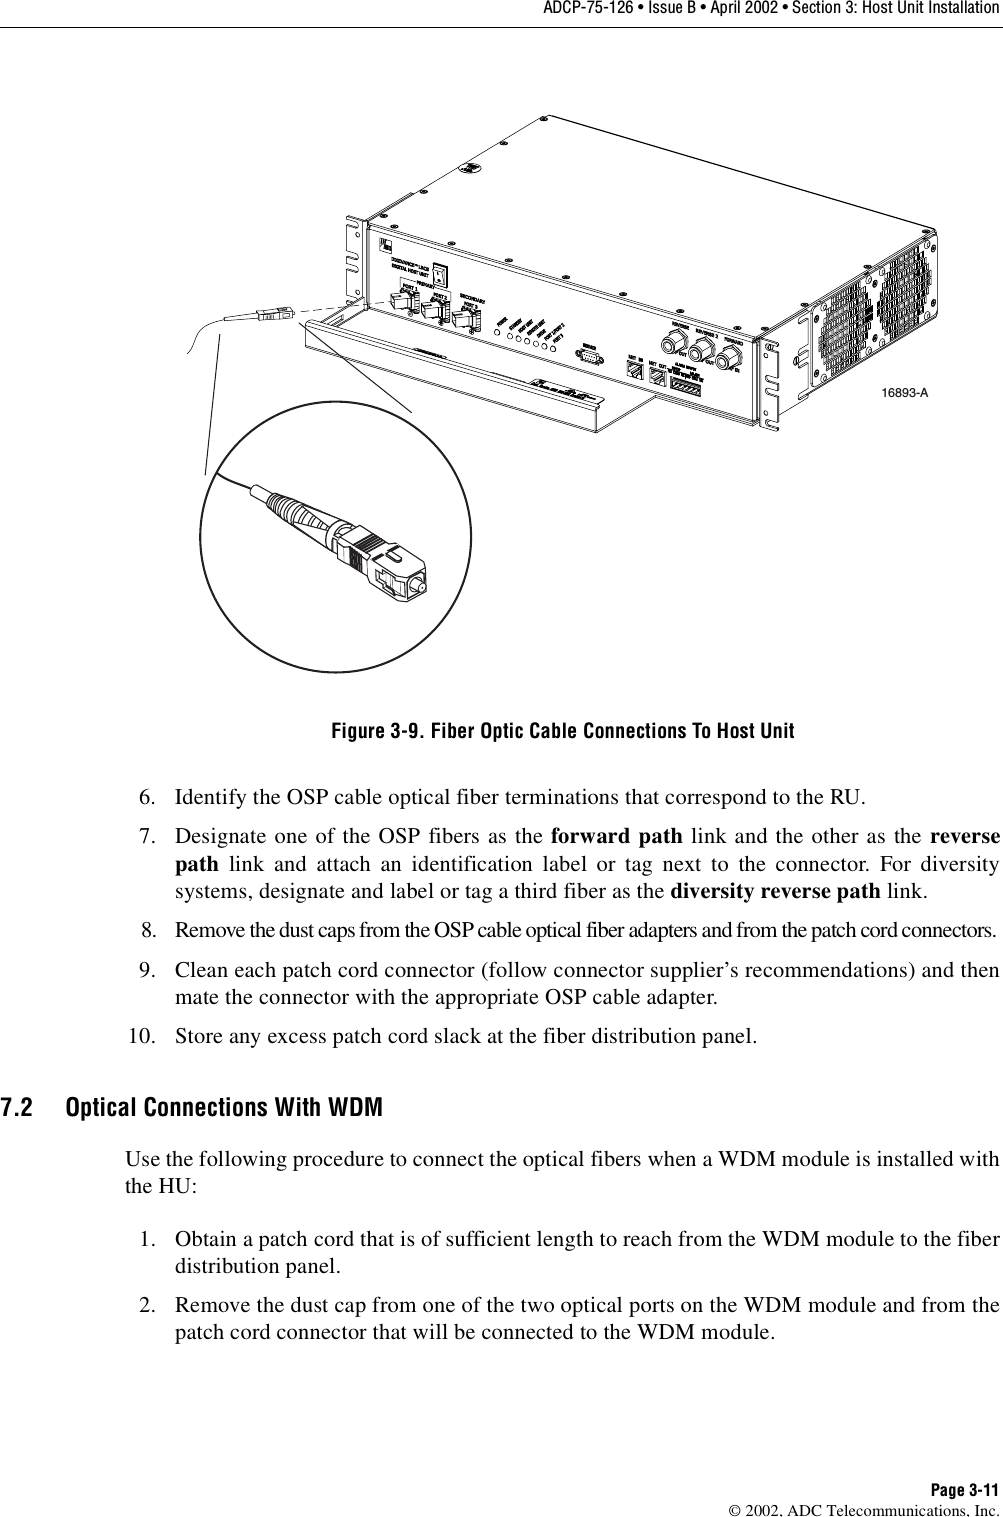 ADCP-75-126 • Issue B • April 2002 • Section 3: Host Unit InstallationPage 3-11©2002, ADC Telecommunications, Inc.Figure 3-9. Fiber Optic Cable Connections To Host Unit6. Identify the OSP cable optical fiber terminations that correspond to the RU.7. Designate one of the OSP fibers as the forward path link and the other as the reversepath link and attach an identification label or tag next to the connector. For diversitysystems, designate and label or tag athird fiber as the diversity reverse path link.8. Remove the dust caps from the OSP cable optical fiber adapters and from the patch cord connectors.9. Clean each patch cord connector (follow connector supplier’s recommendations) and thenmate the connector with the appropriate OSP cable adapter.10. Store any excess patch cord slack at the fiber distribution panel.7.2 Optical Connections With WDMUse the following procedure to connect the optical fibers when aWDM module is installed withthe HU:1. Obtain apatch cord that is of sufficient length to reach from the WDM module to the fiberdistribution panel.2. Remove the dust cap from one of the two optical ports on the WDM module and from thepatch cord connector that will be connected to the WDM module.16893-A